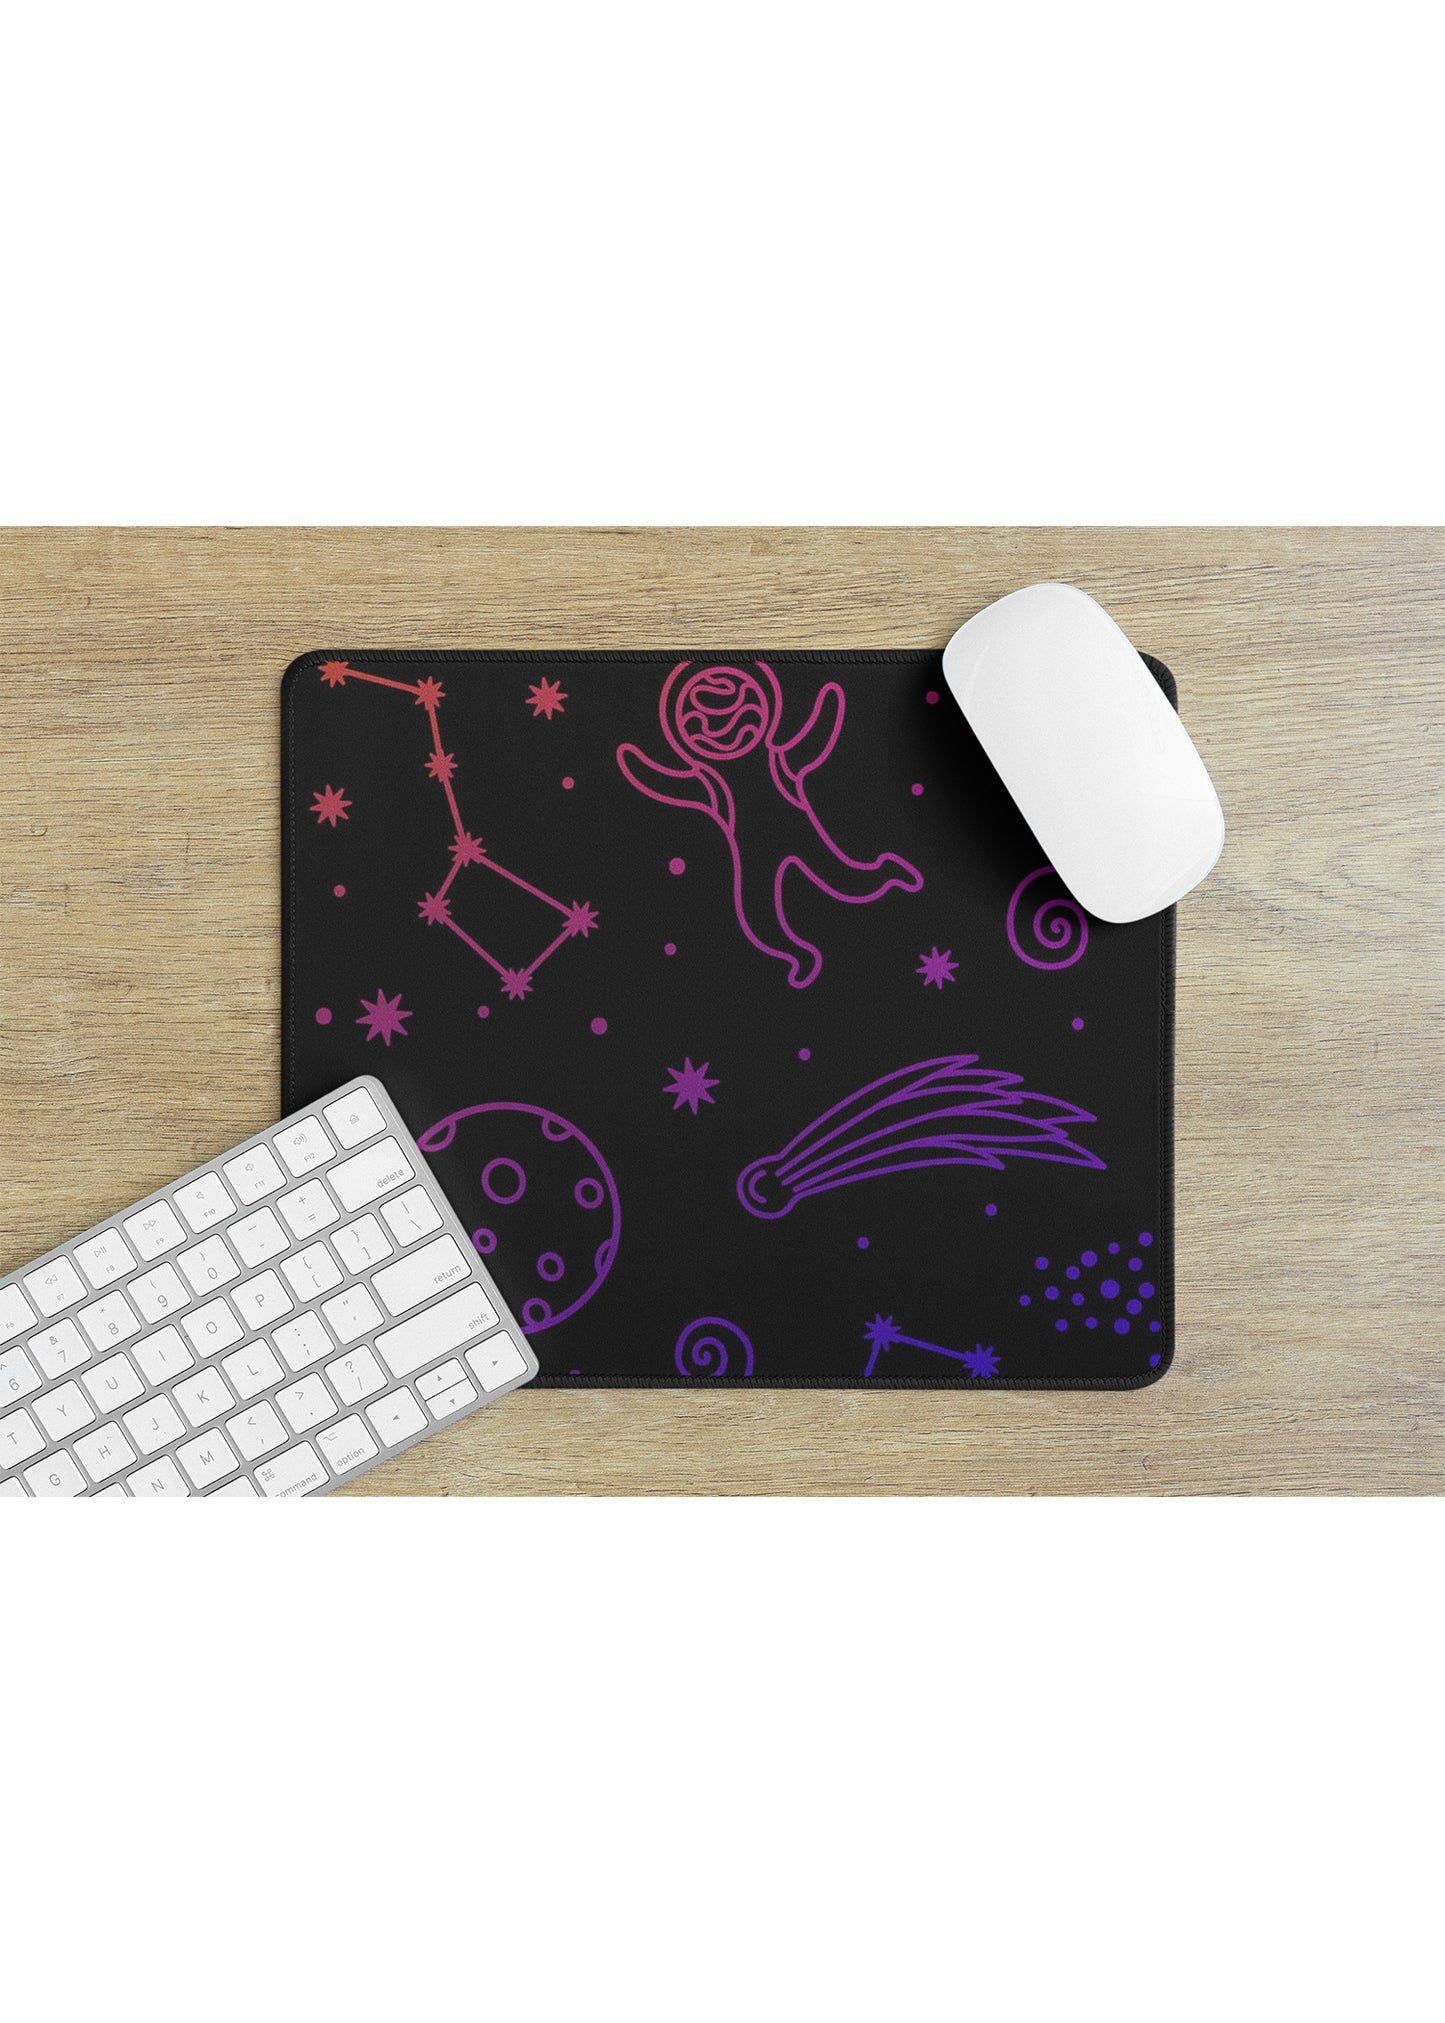 SPACE ART MOUSE PAD